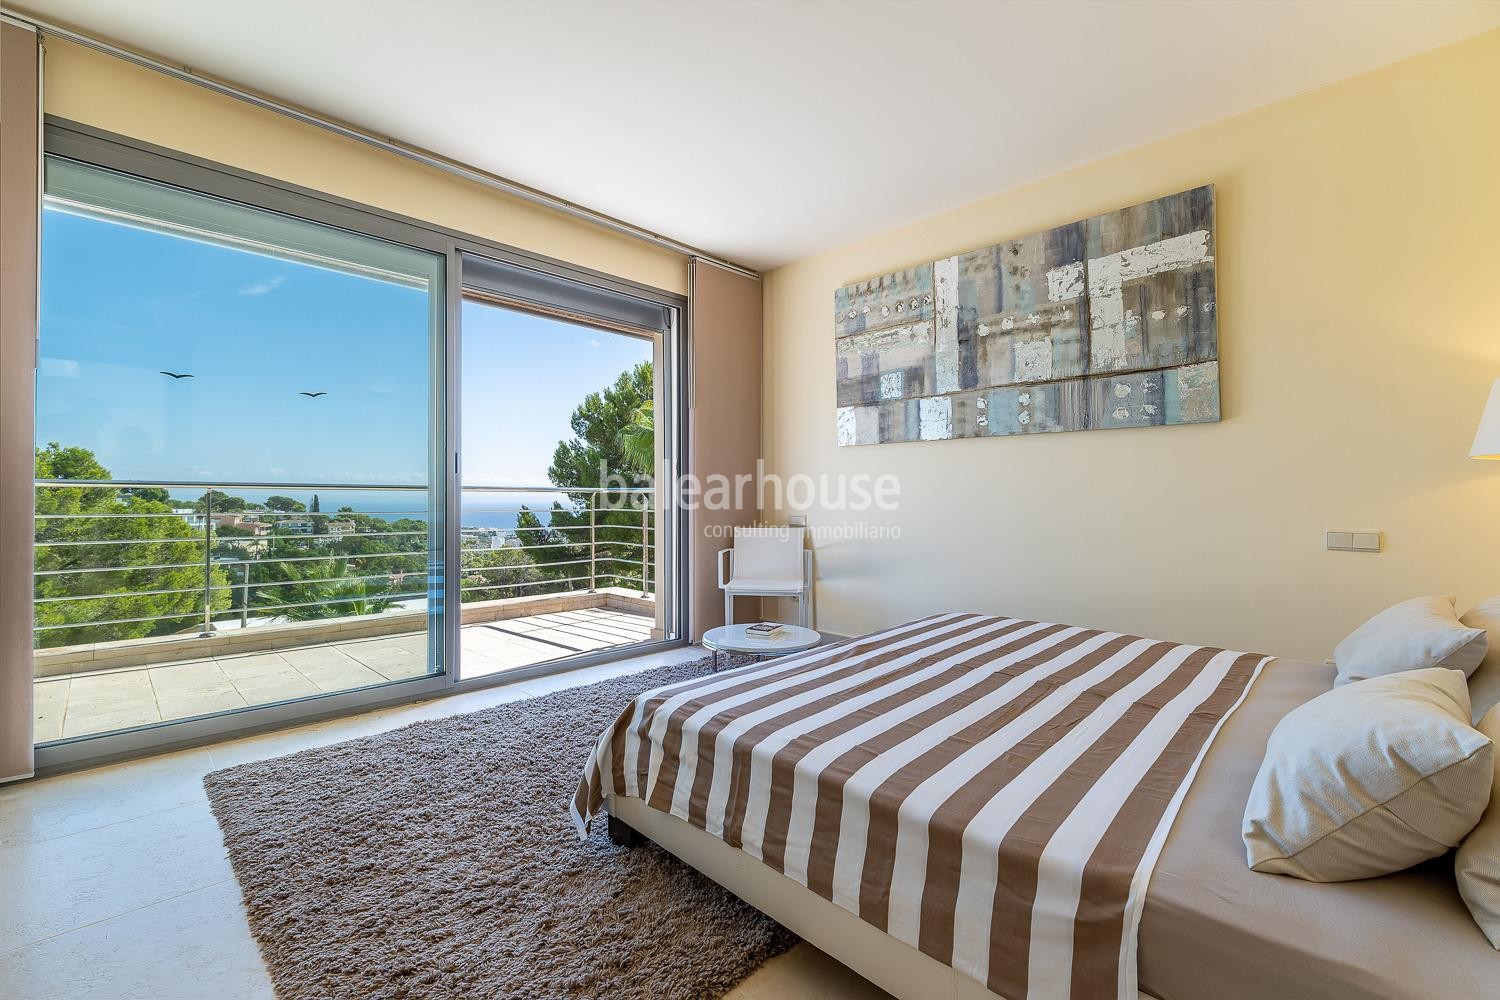 Mediterranean style villa with beautiful sea views and sunsets in Costa den Blanes